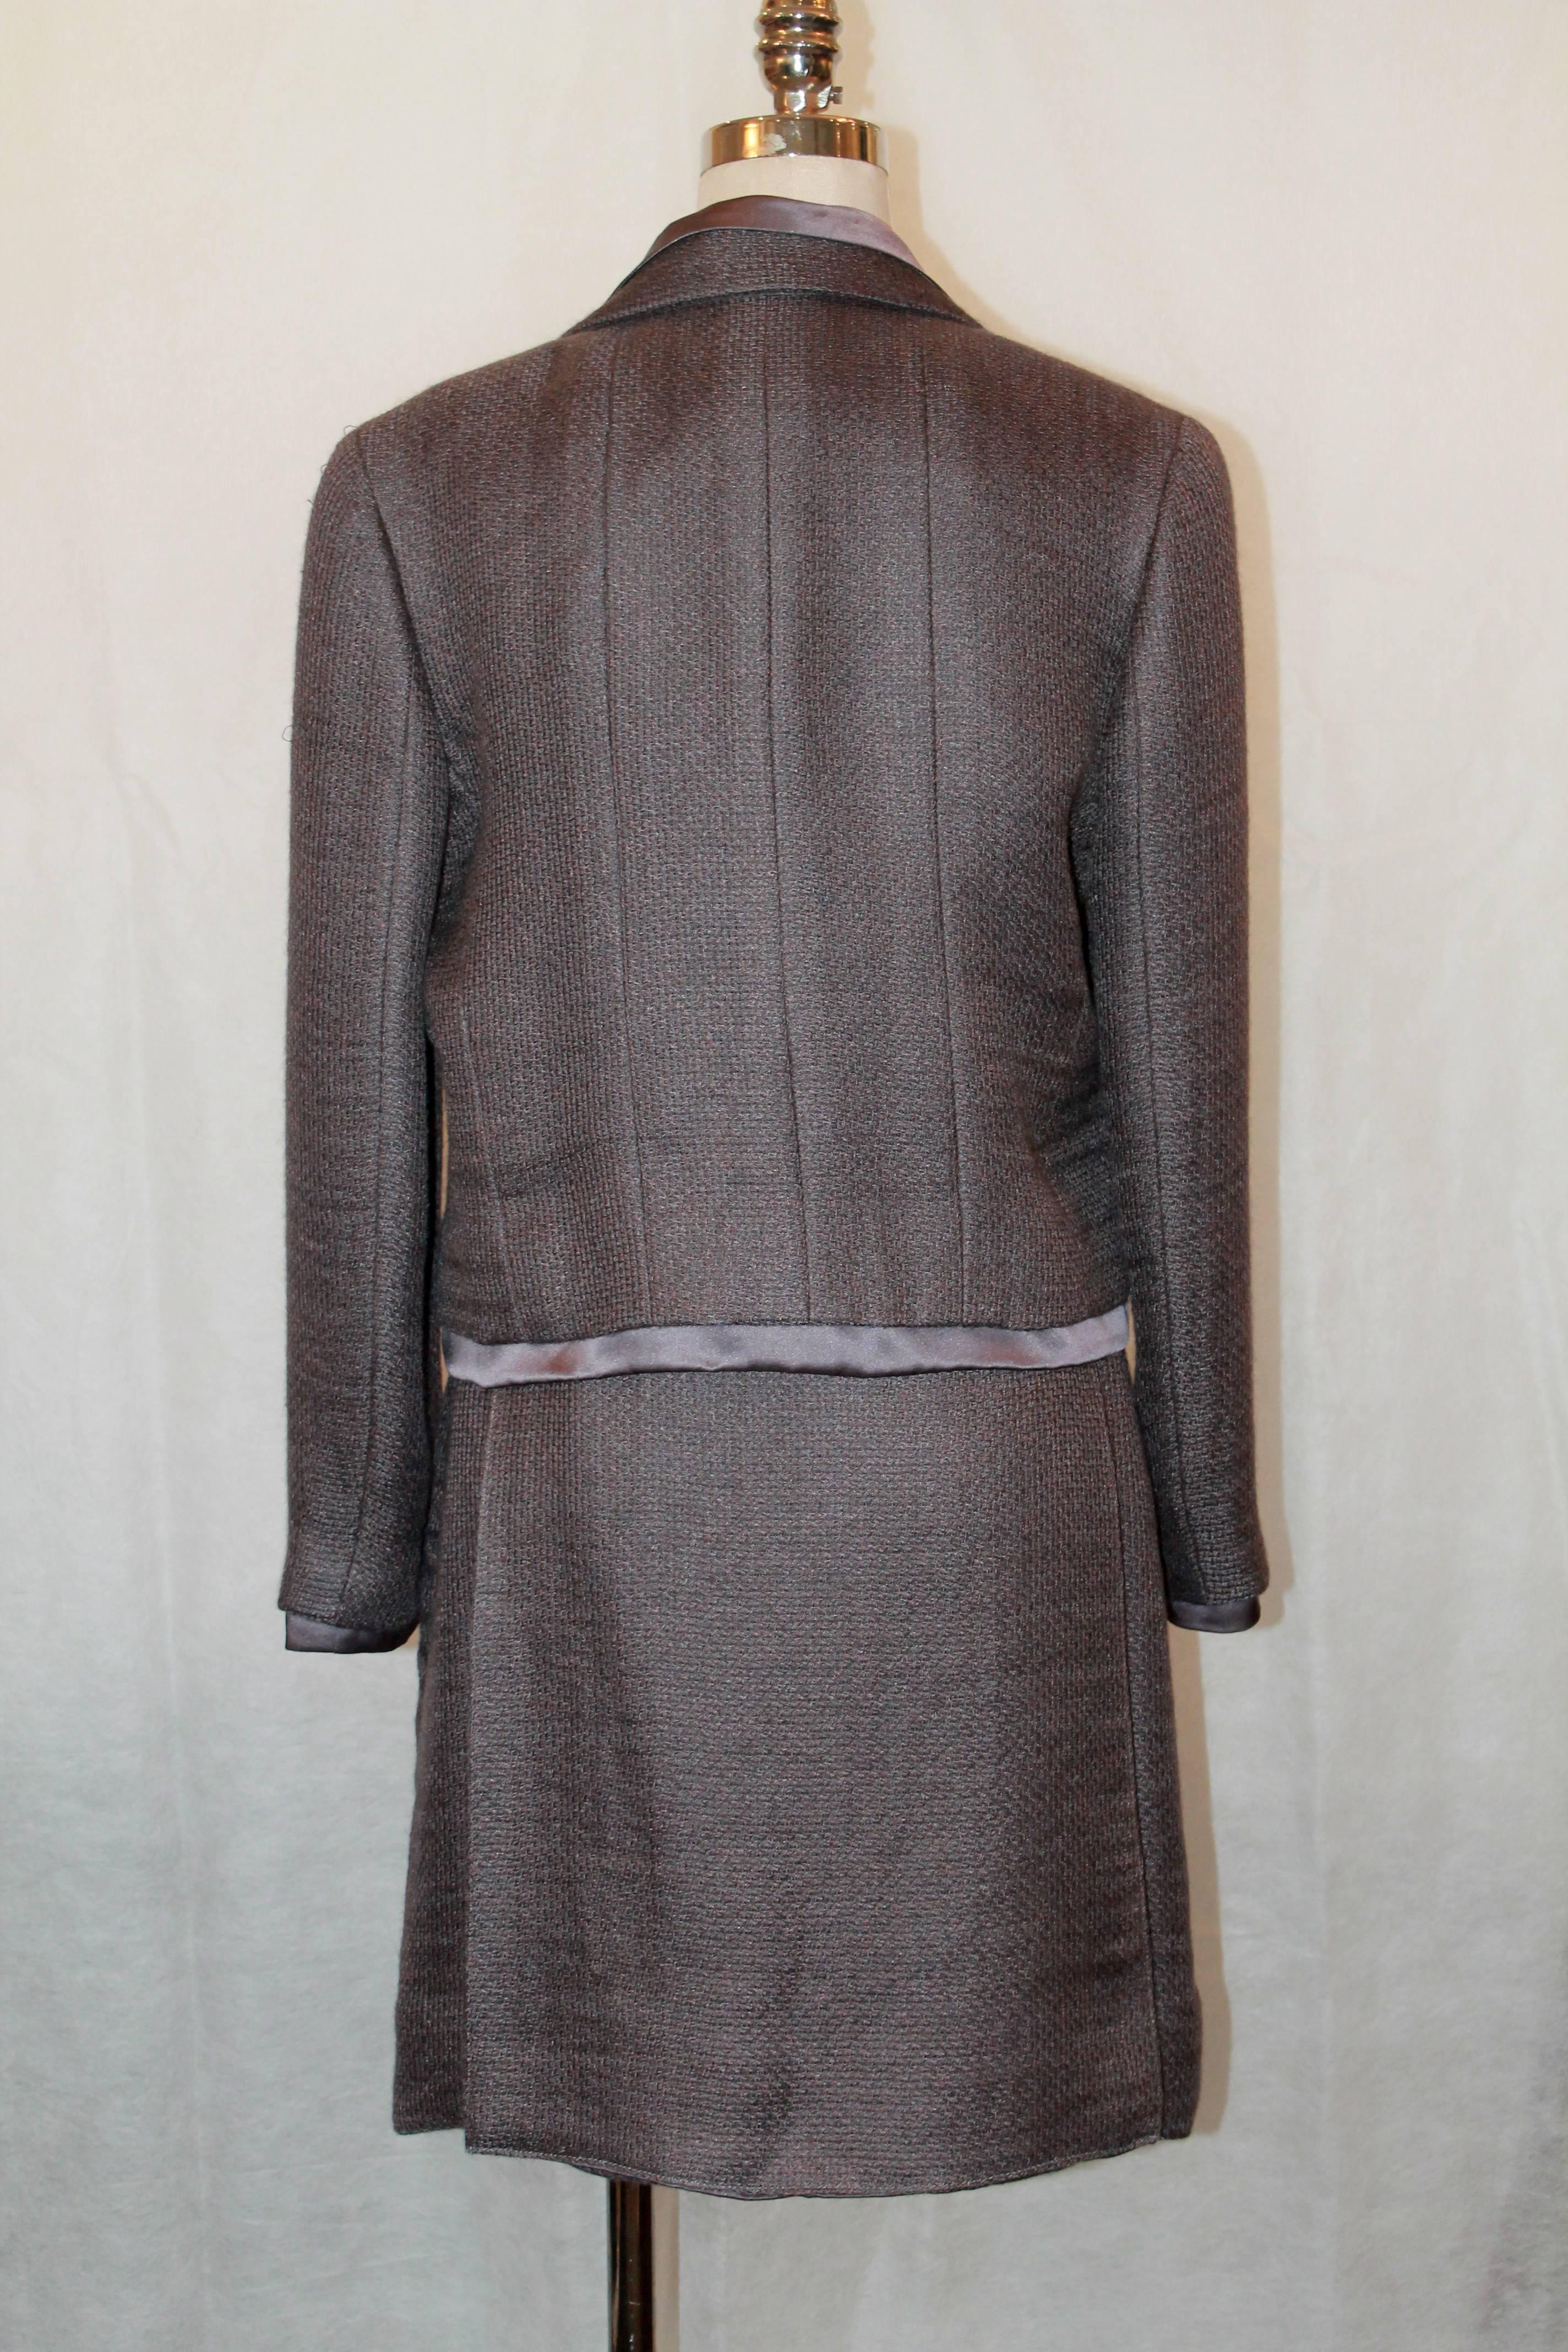 Women's Chanel Fall 1999 Eggplant Mohair & Silk Skirt Suit & Top Set -Size 40 For Sale